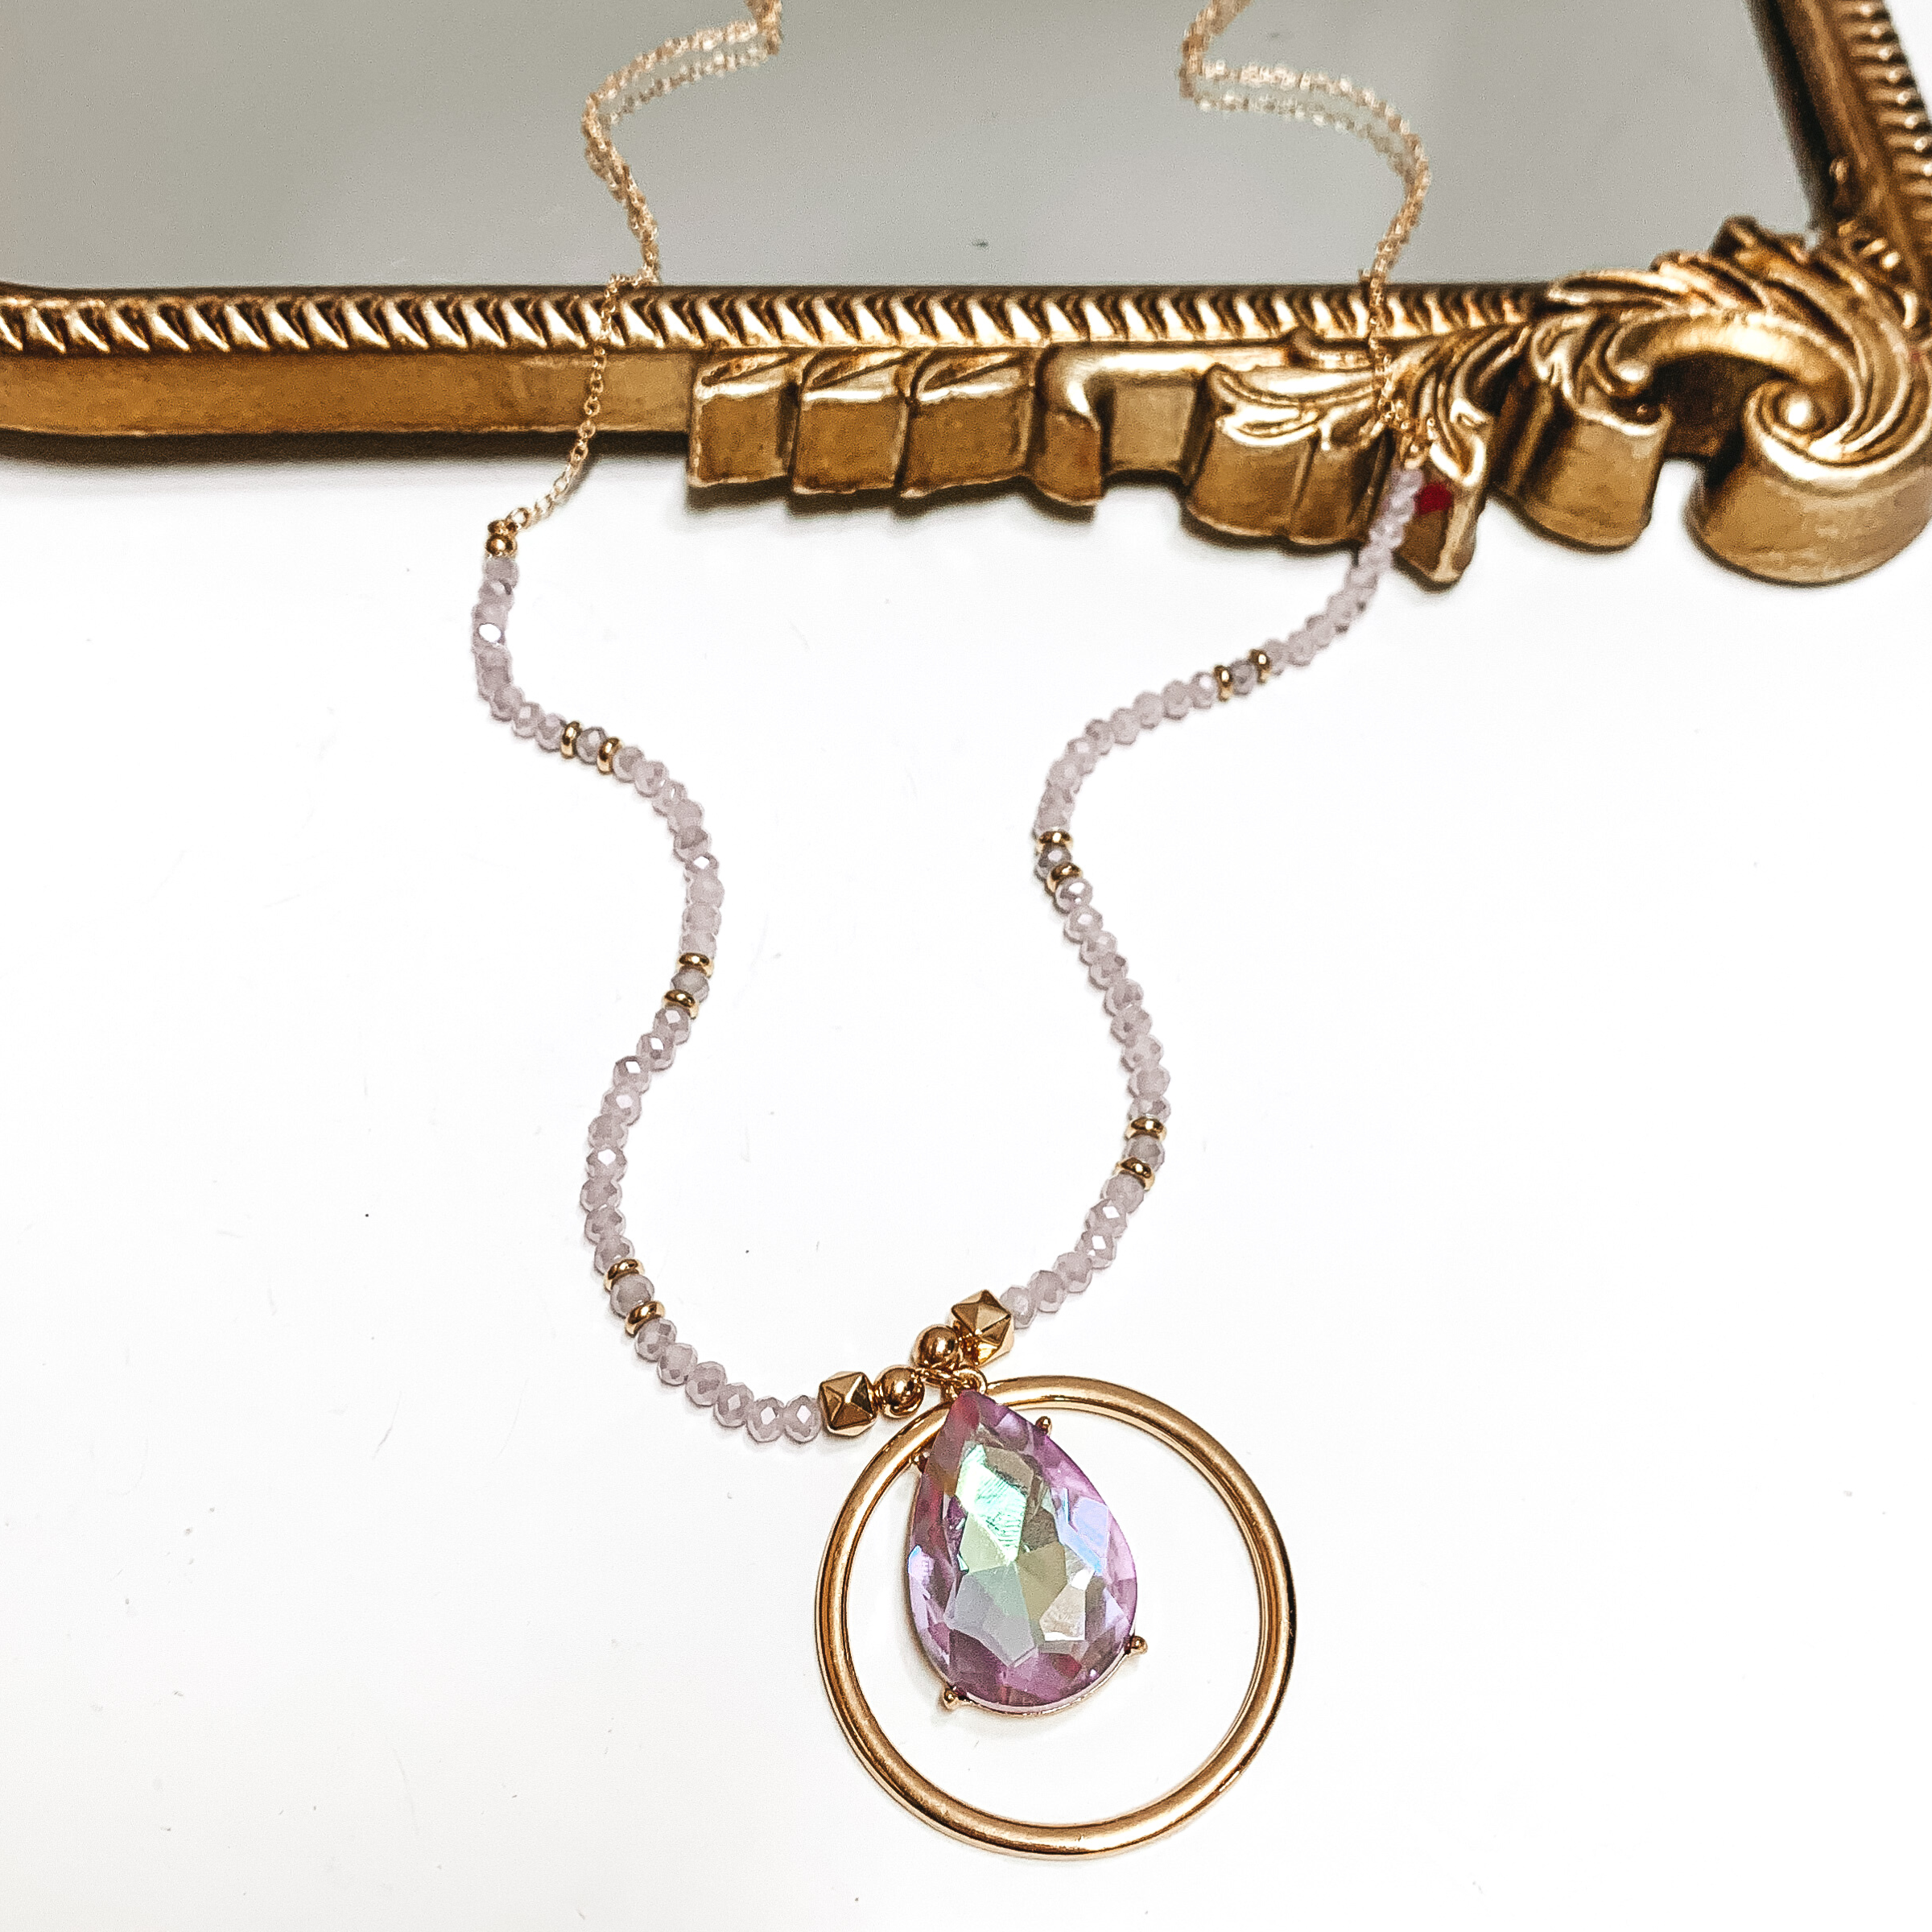 Gold and lavender beaded necklace with a gold, open circle pendant and hanging purple ab teardrop crystal. This necklace is pictured partially laying on a mirror on a white background. 